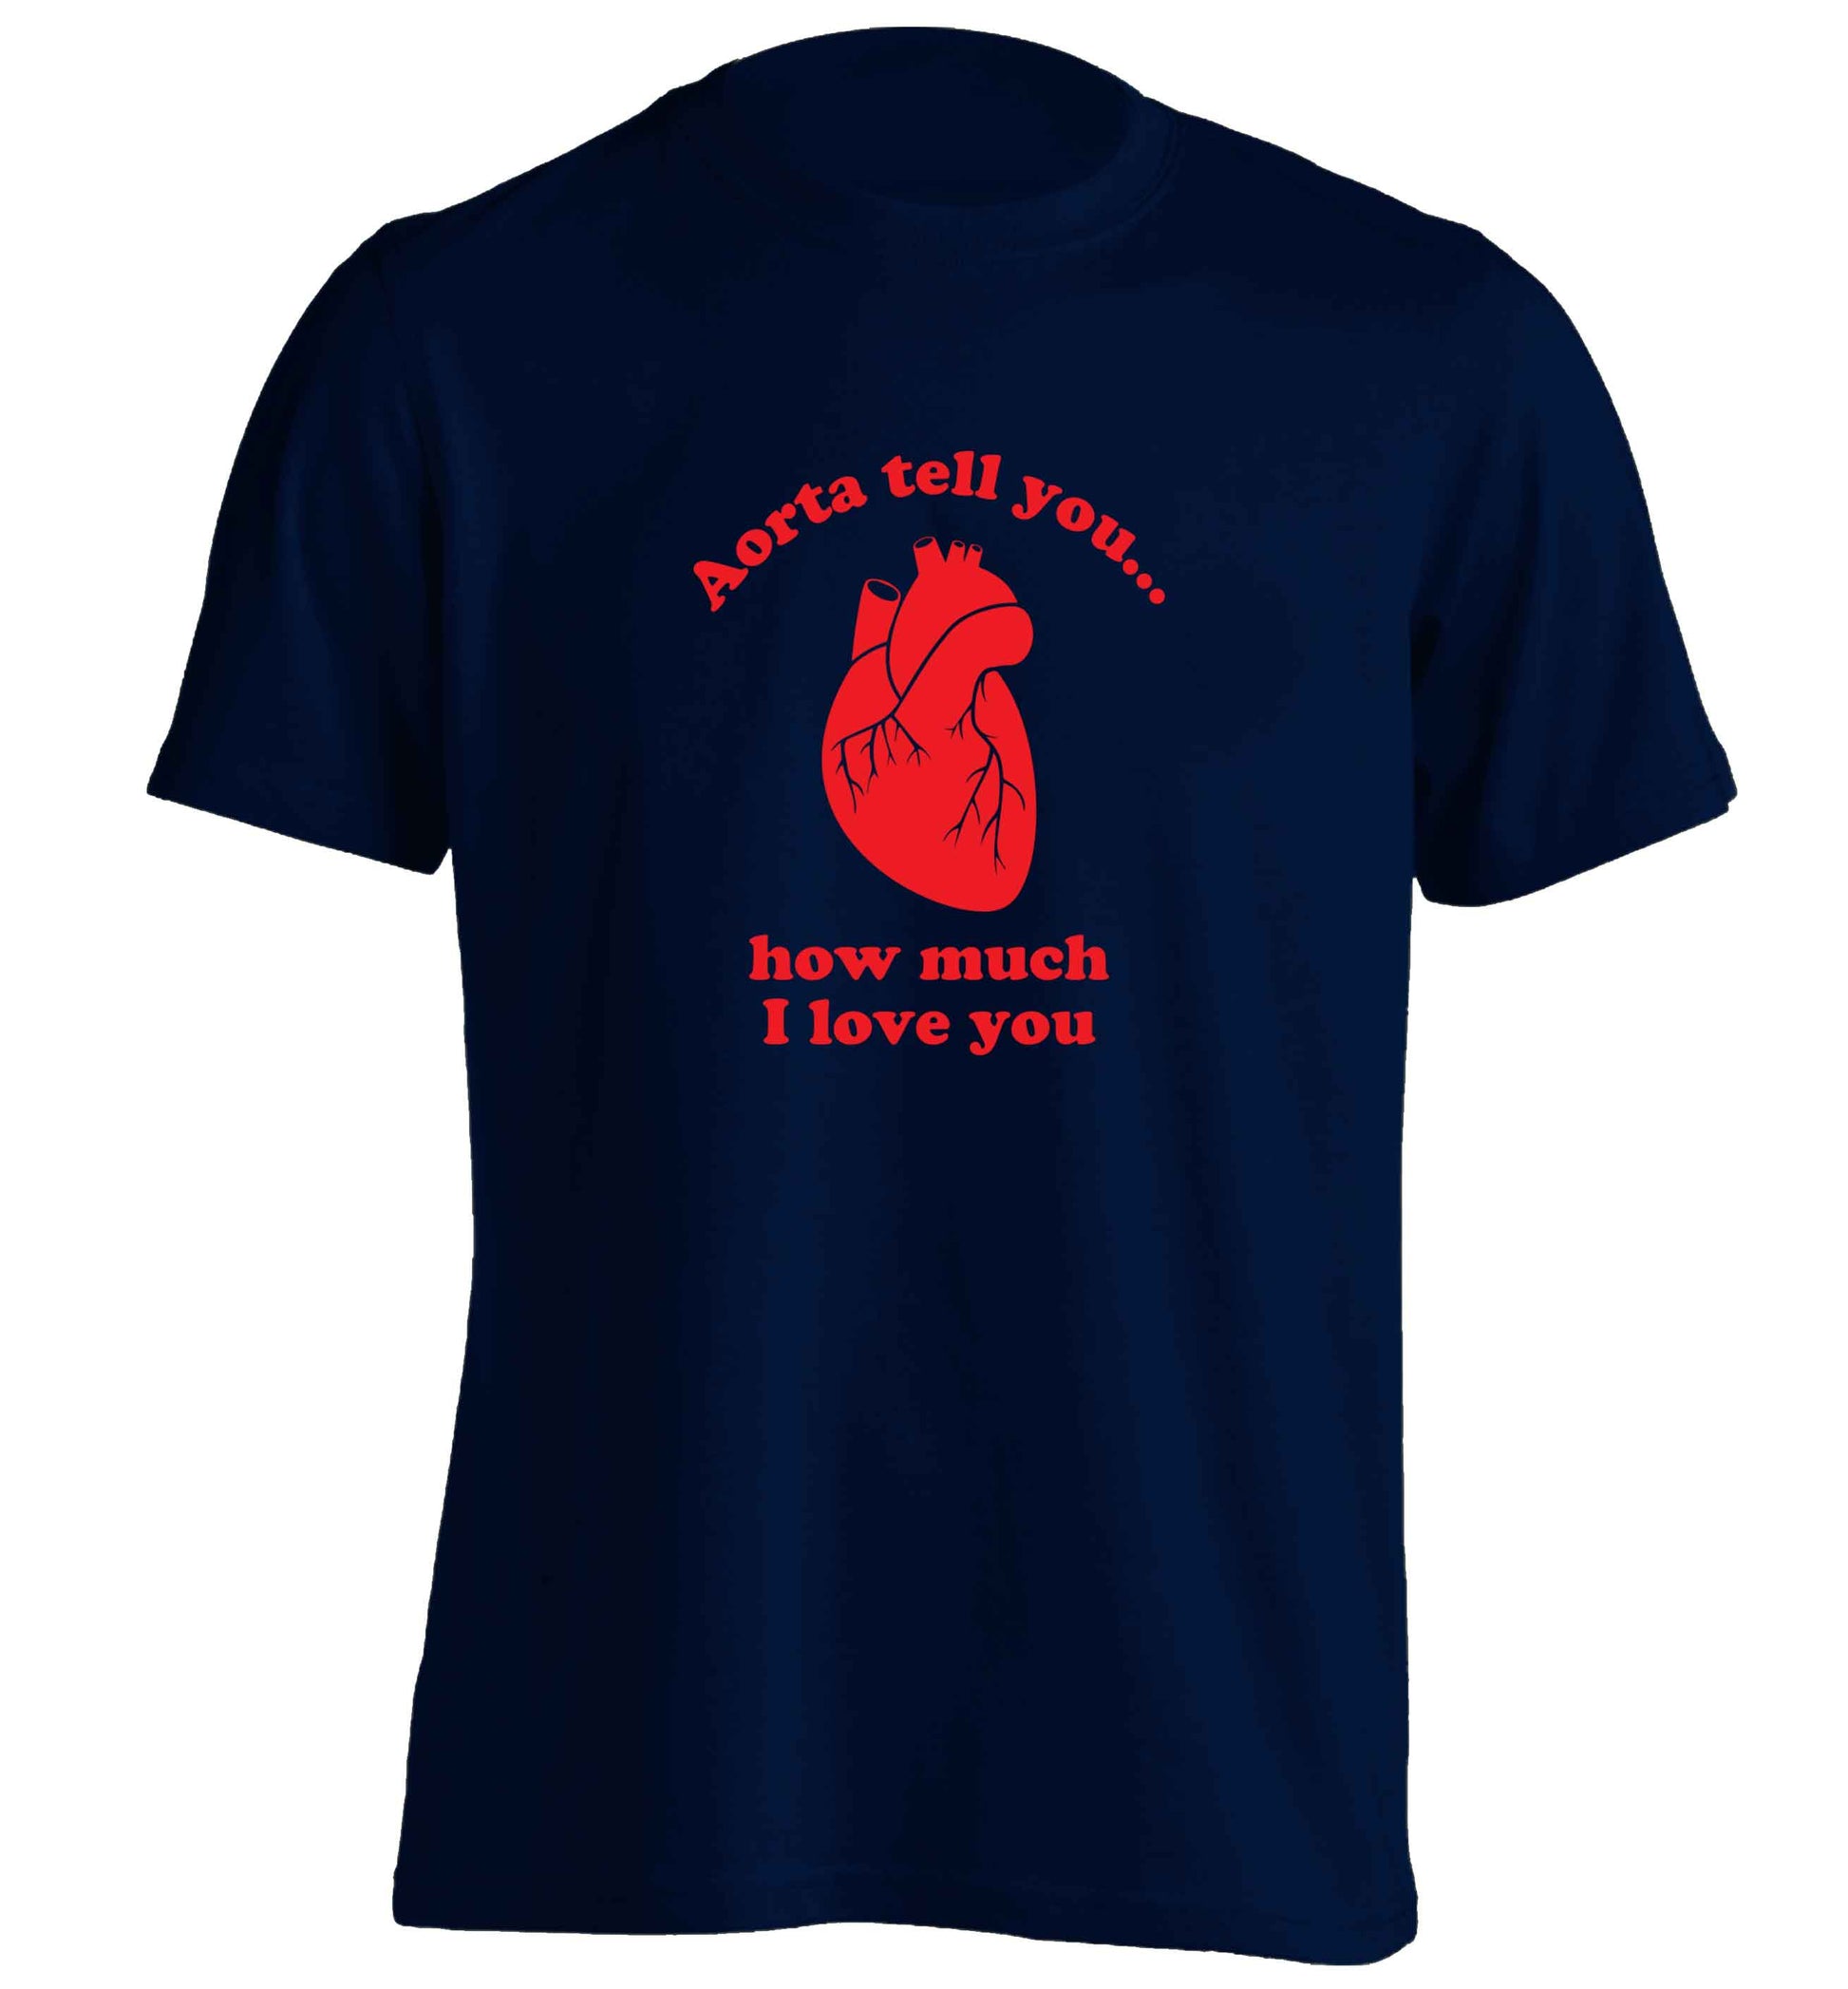 Aorta tell you how much I love you adults unisex navy Tshirt 2XL